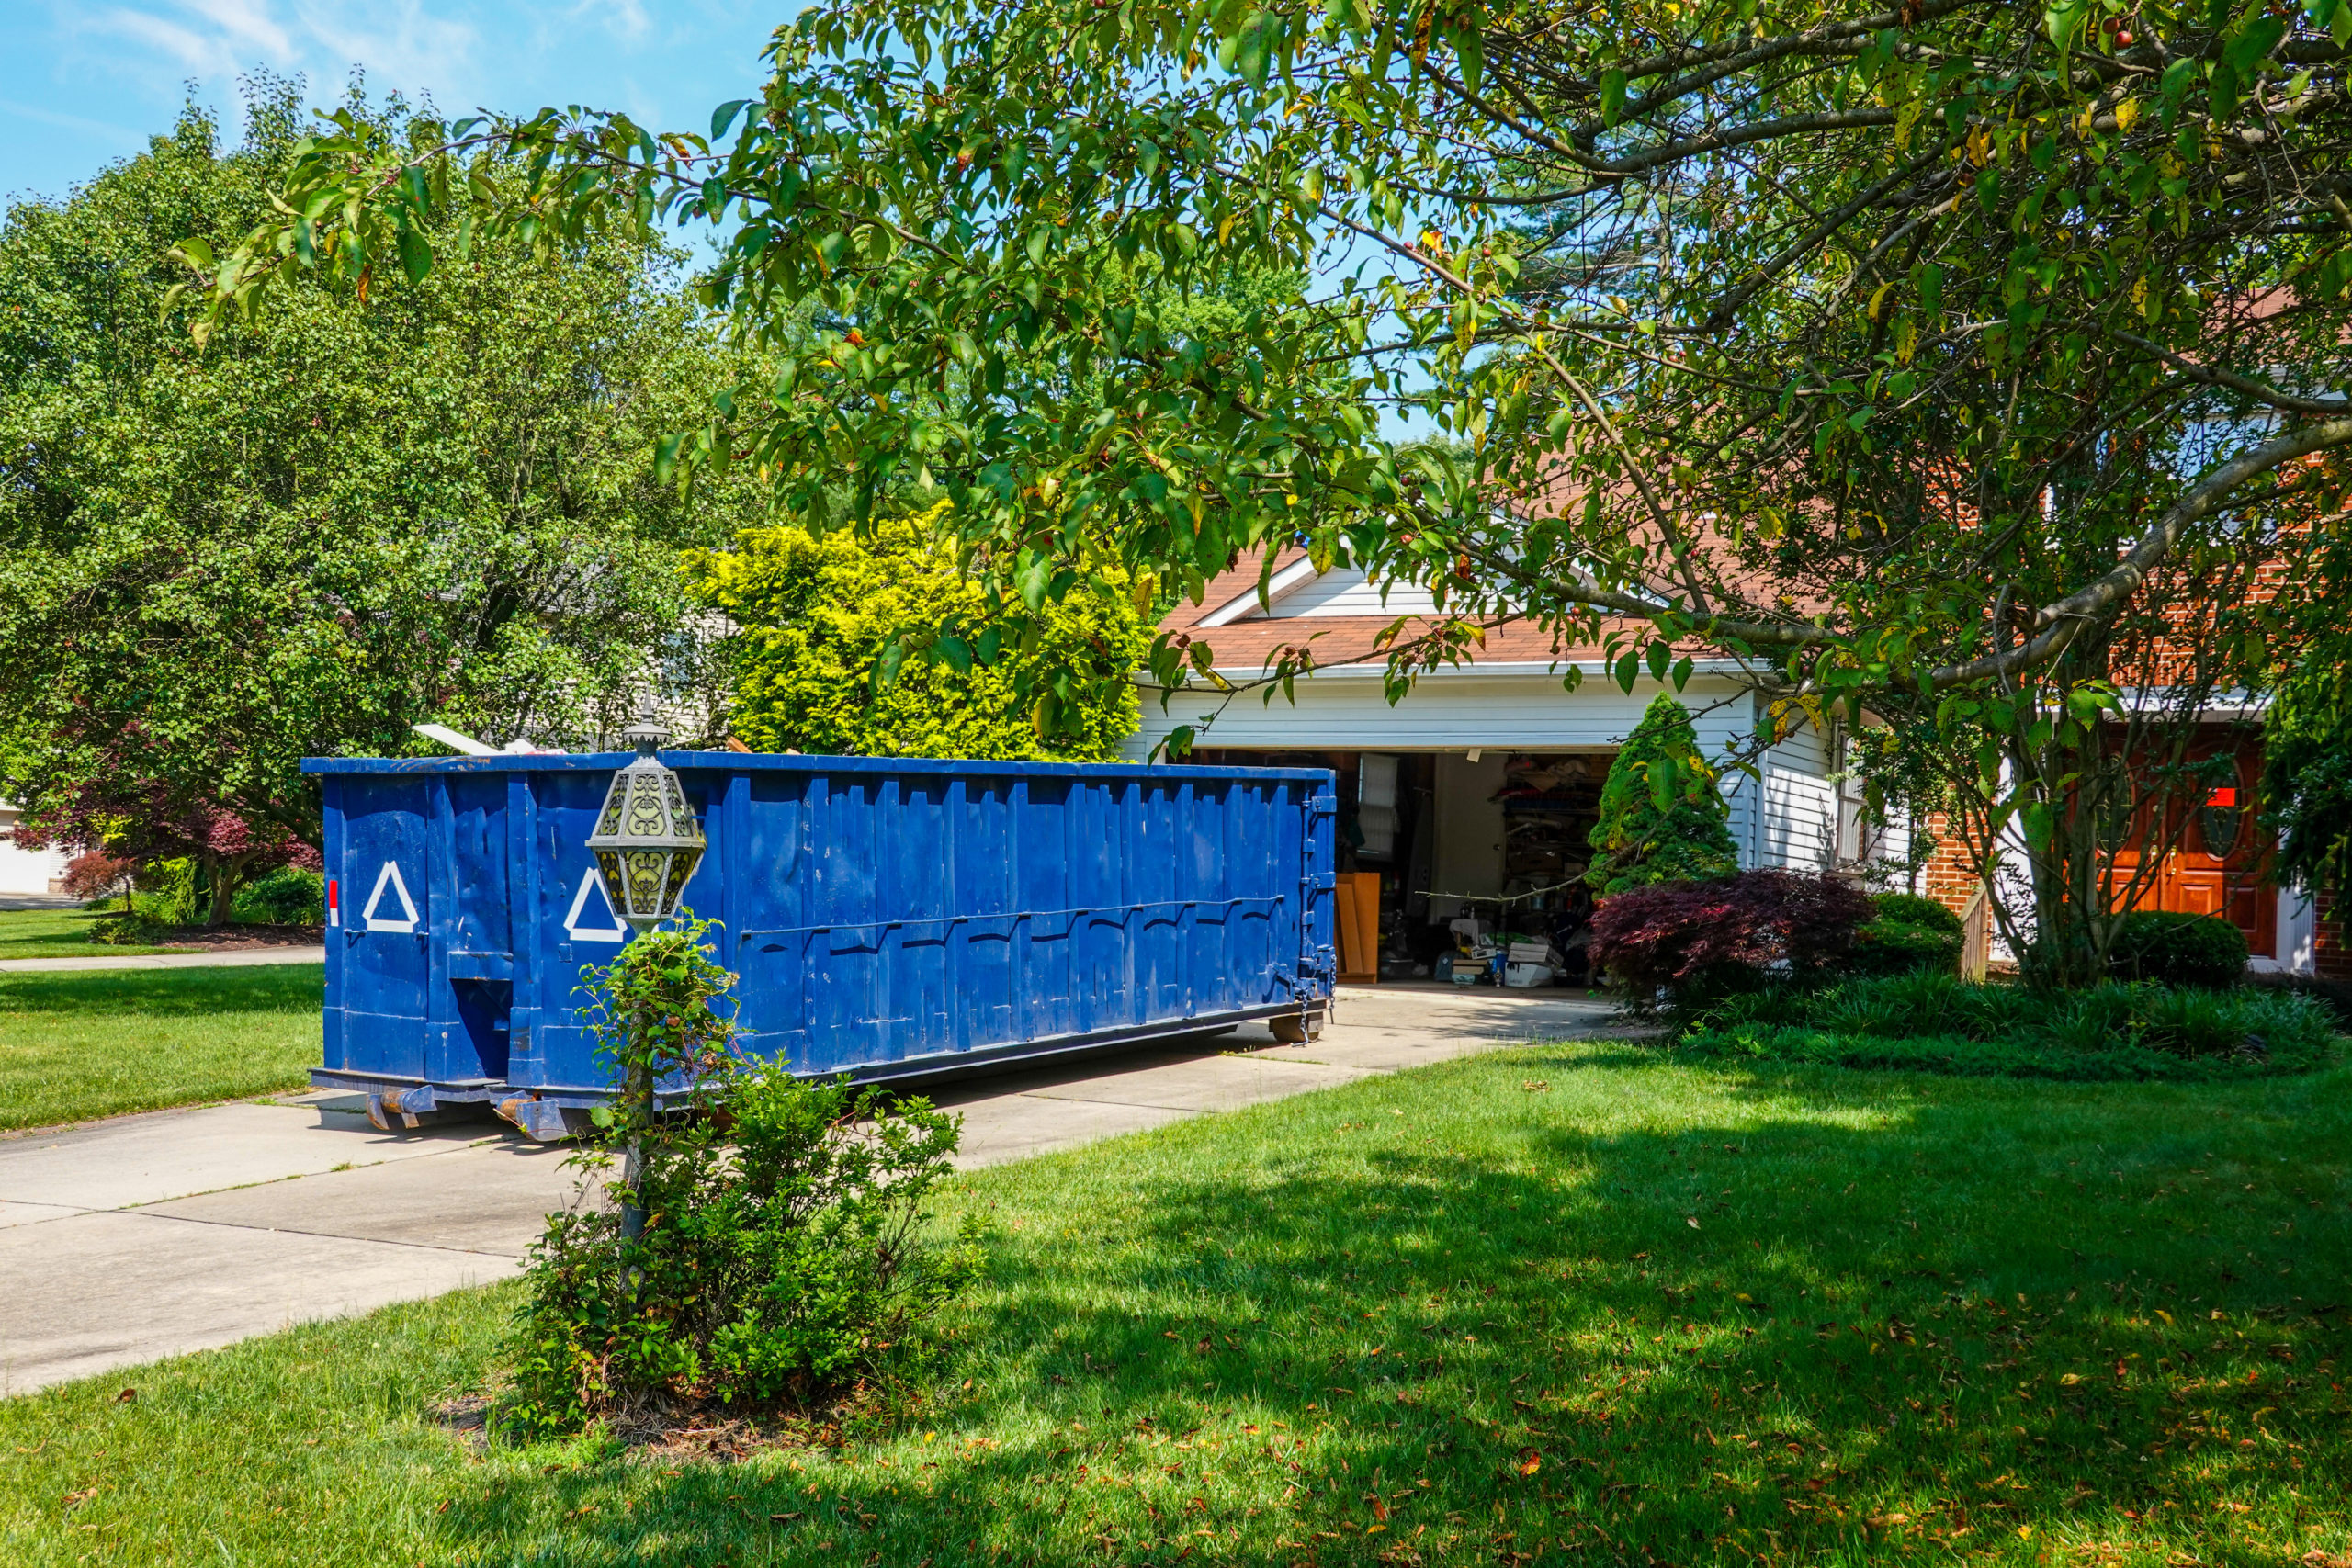 A roll off dumpster rental in Fort Worth